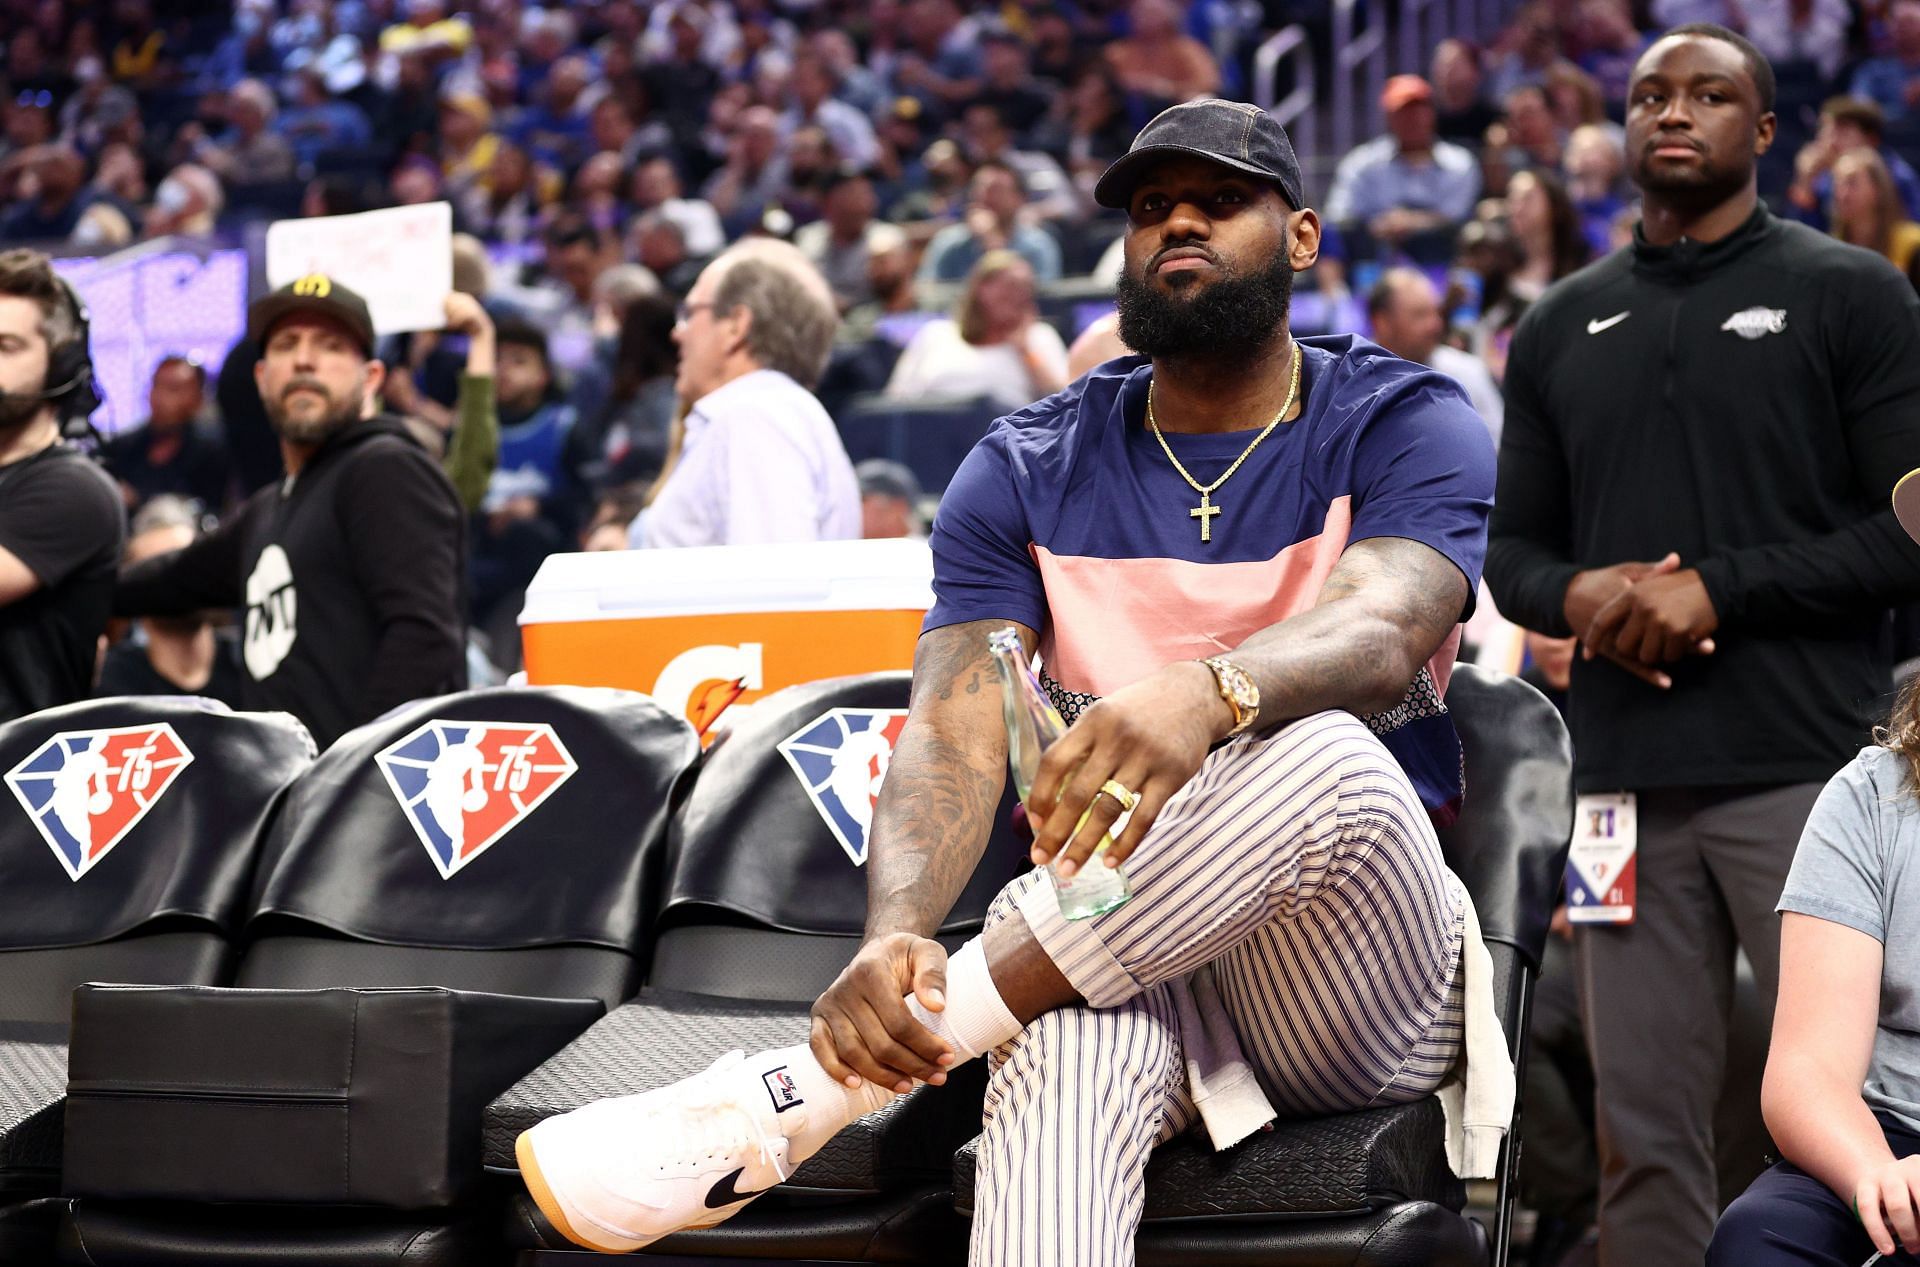 Injured LeBron James #6 of the Los Angeles Lakers sits on the bench